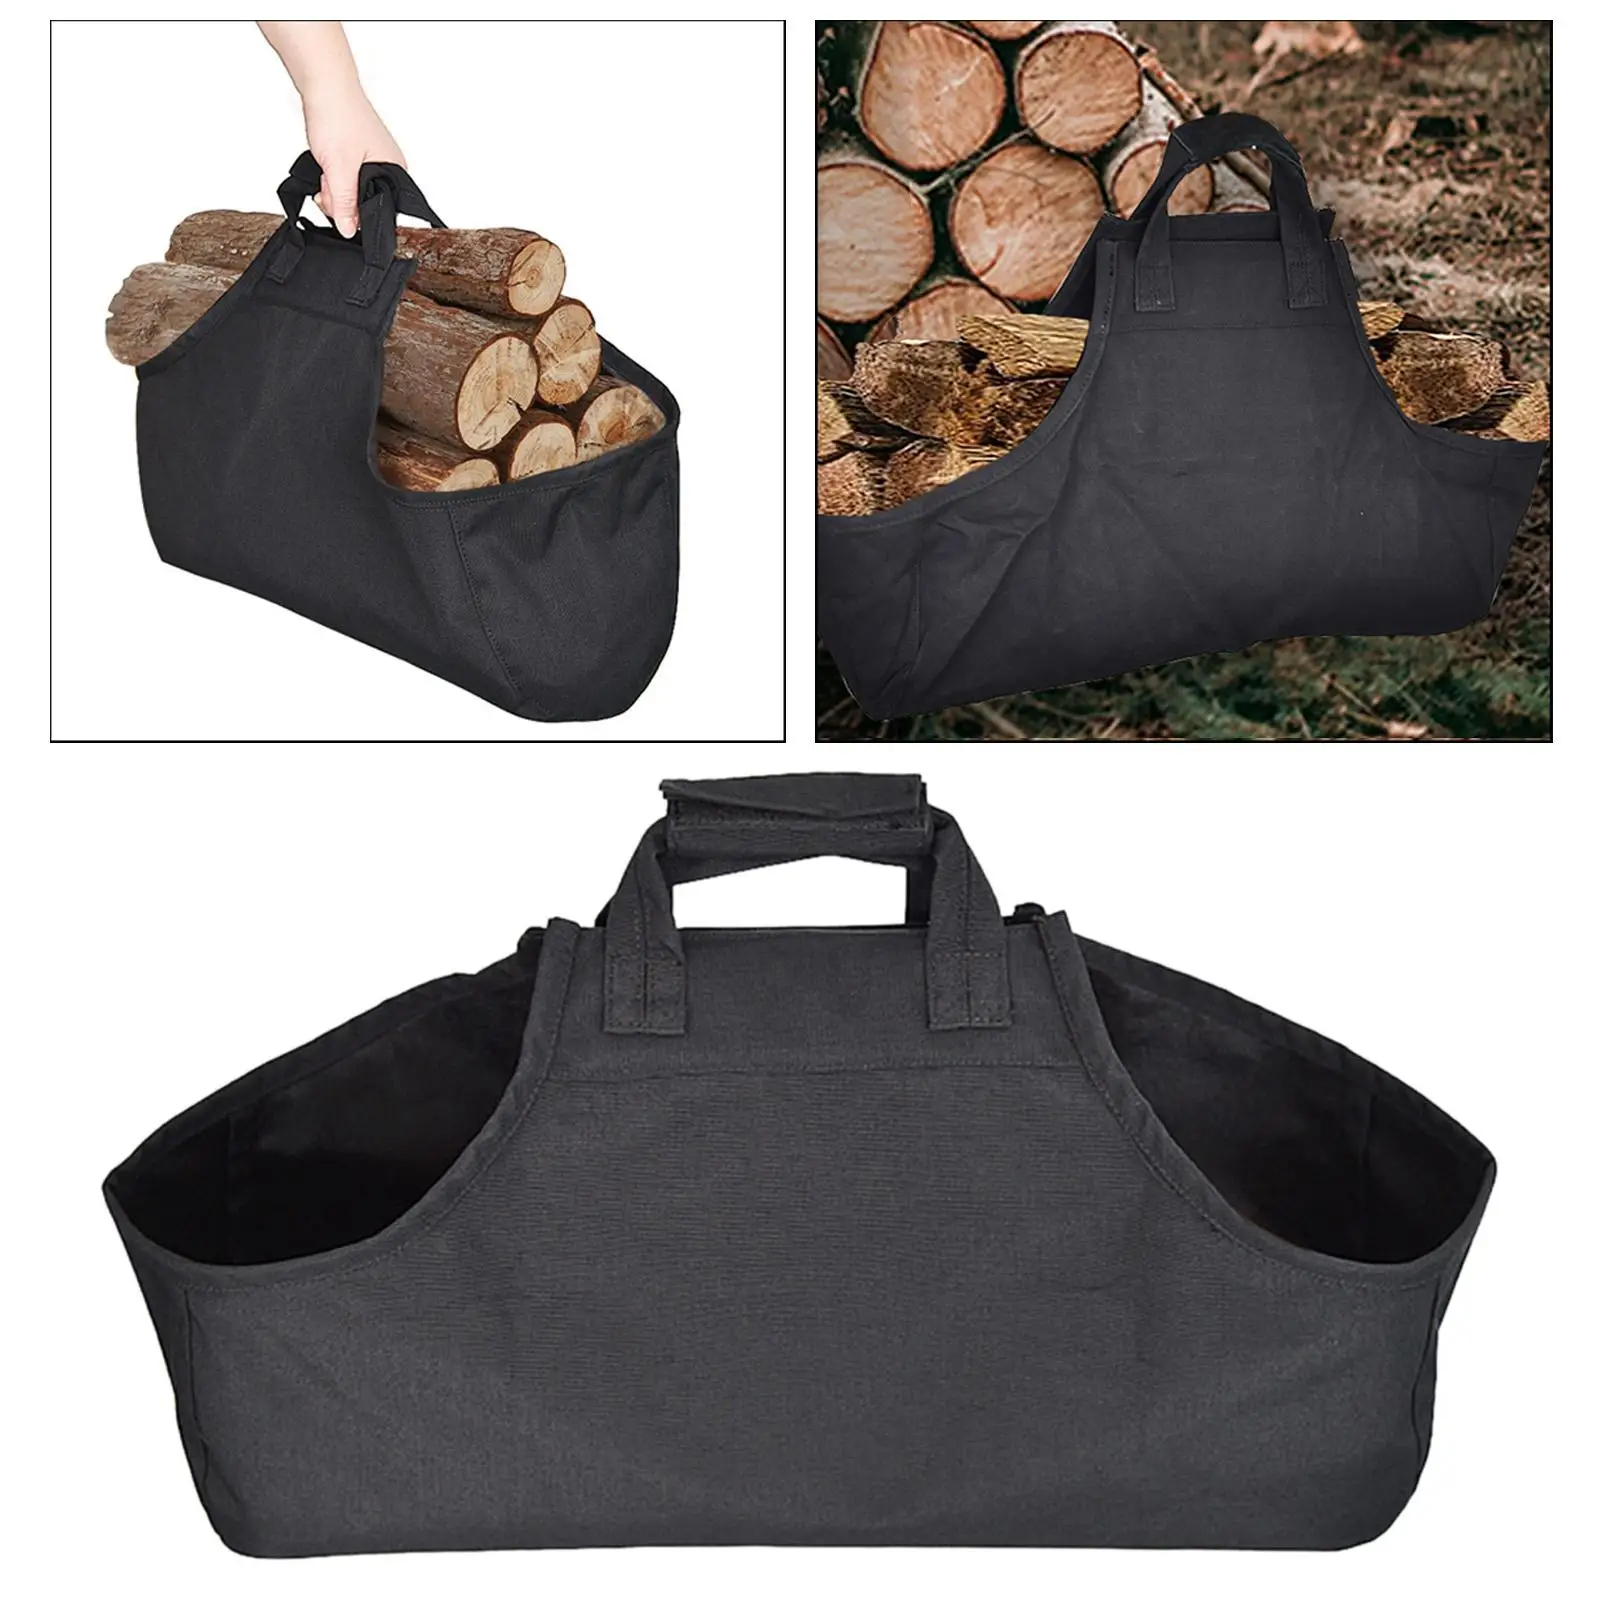 Large Capacity Firewood Carrier Bag Log Tote Wood Holder with Handles Woodpile Rack Carrying for Fireplace Camping Outdoor